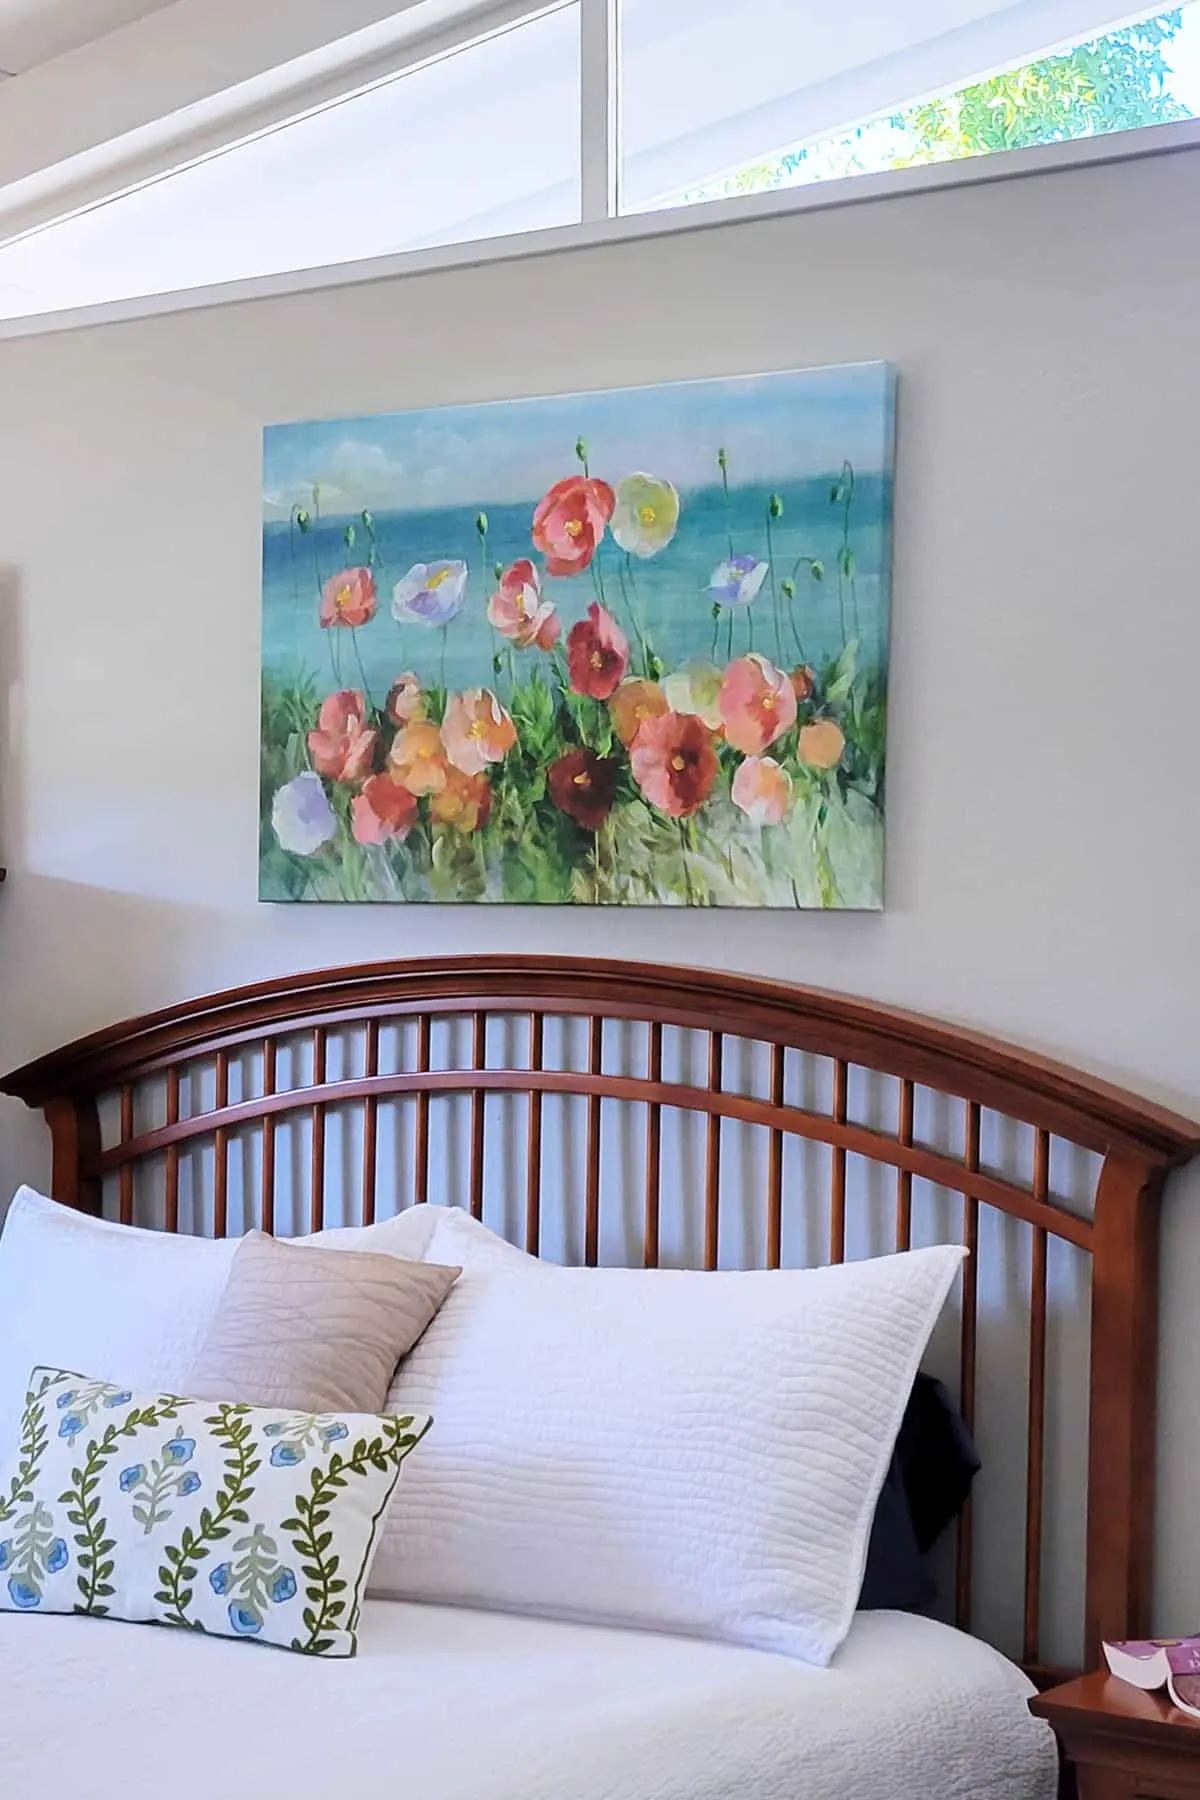 Canvas of Poppies hanging on wall above bed.